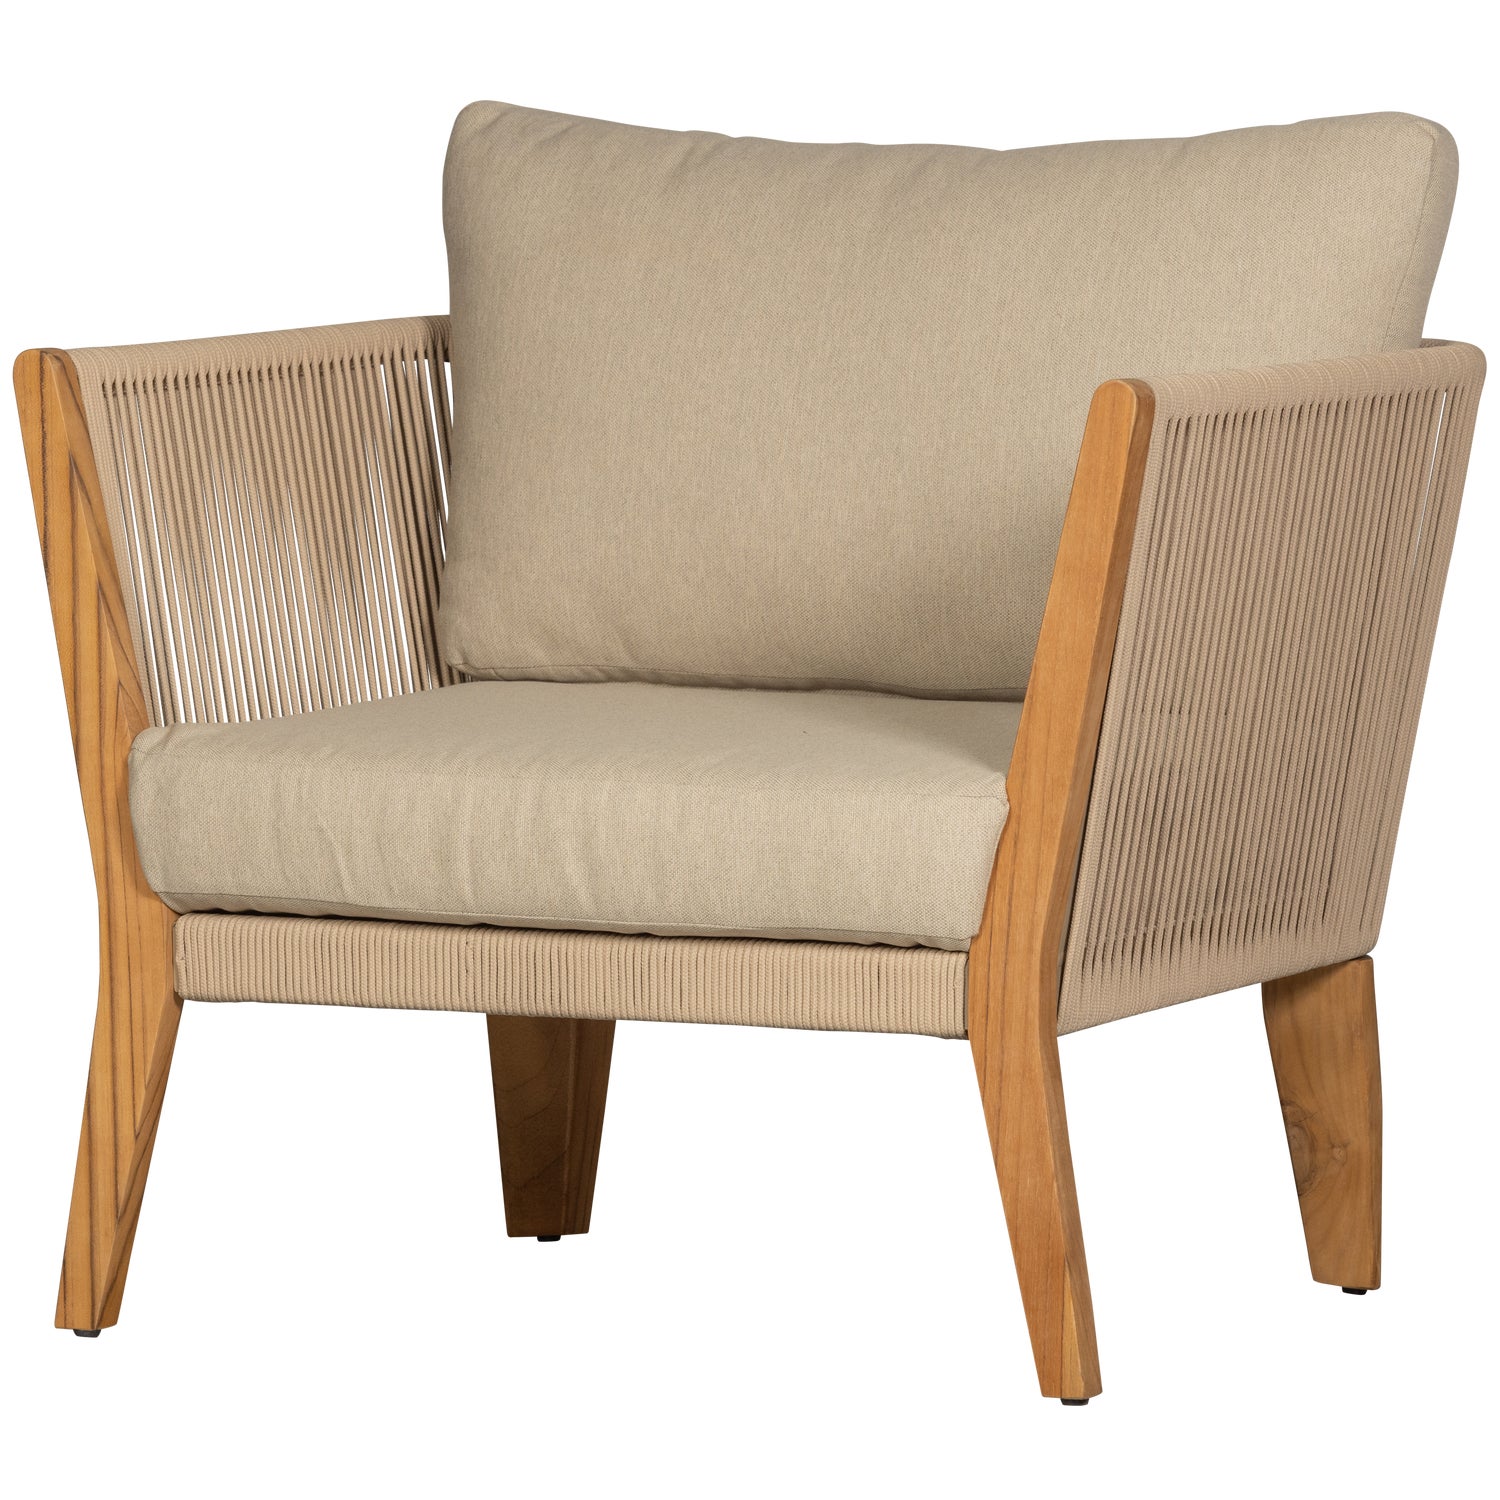 BH428LCS-02_VS_EXT_San_Remo_fauteuil_teak_zand_SA.png?auto=webp&format=png&width=1500&height=1500